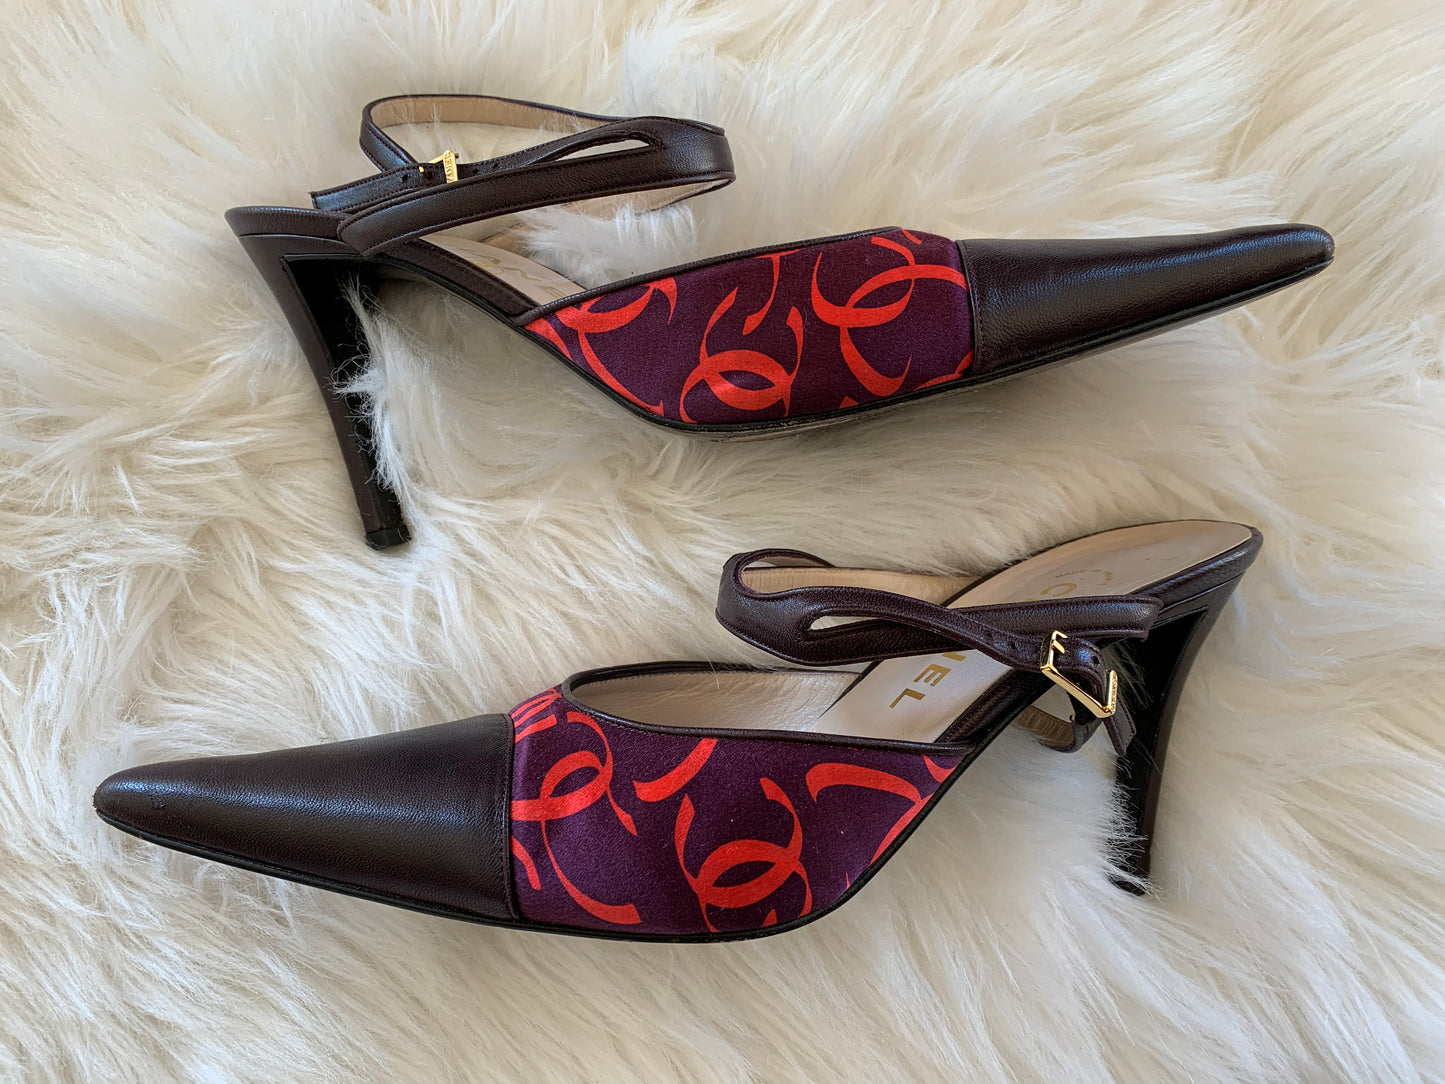 Past auction: Six pairs of Chanel size 5B shoes 1990s